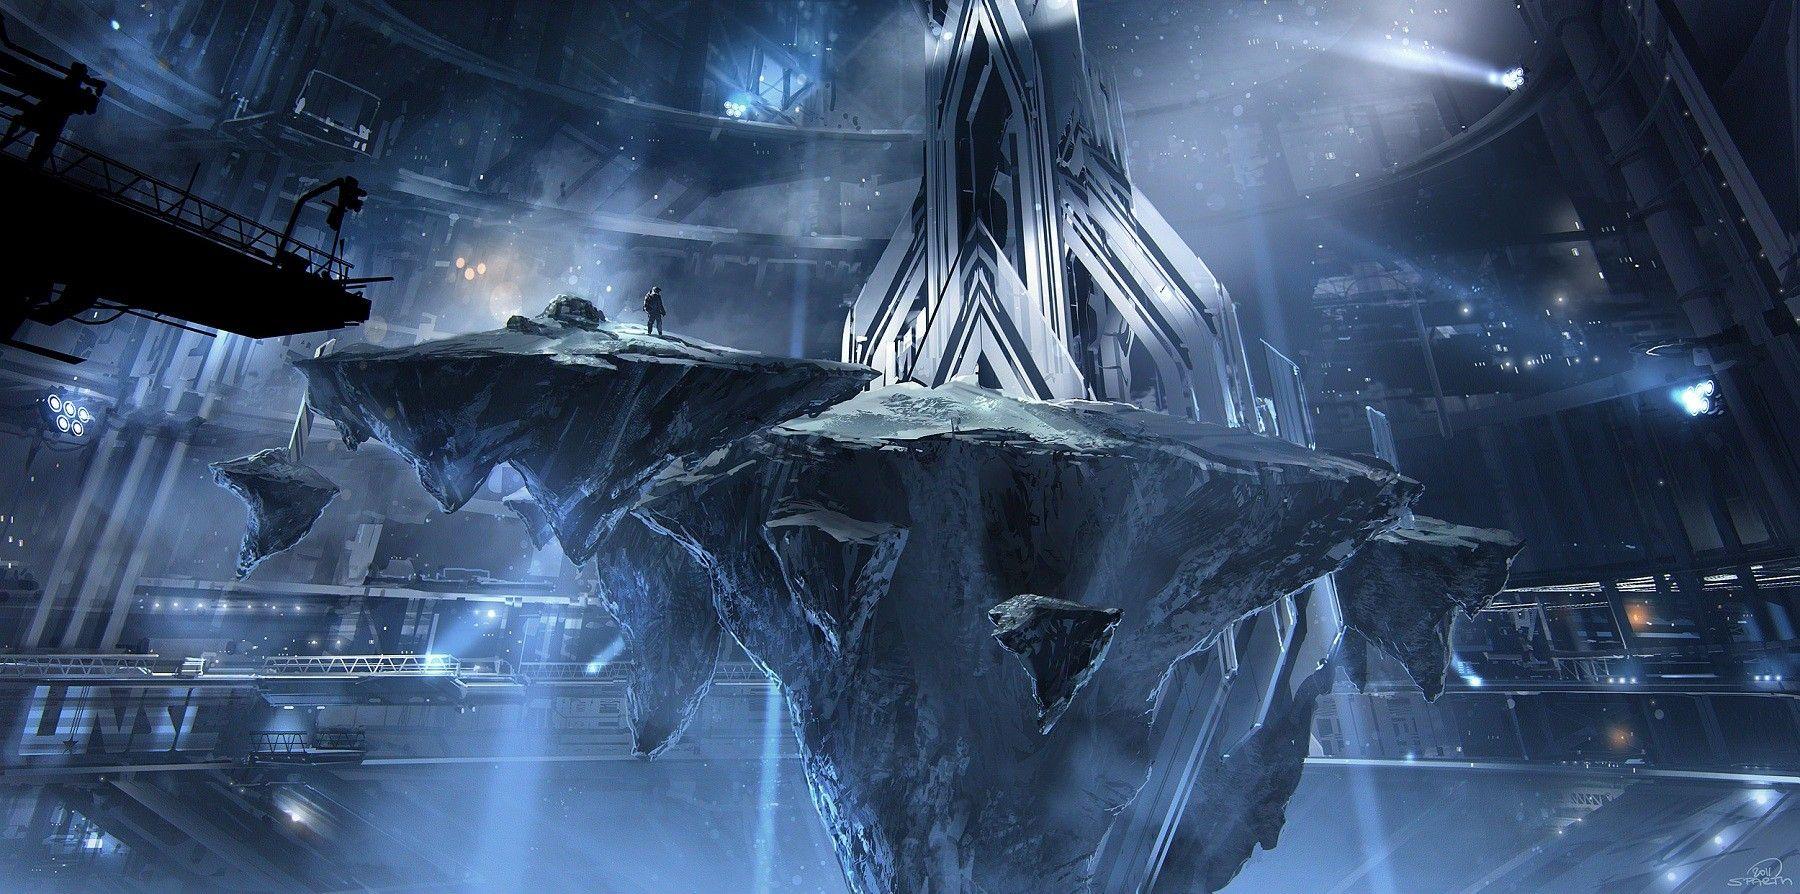 video games, landscapes, outer space, design, Cortana, Halo, Master